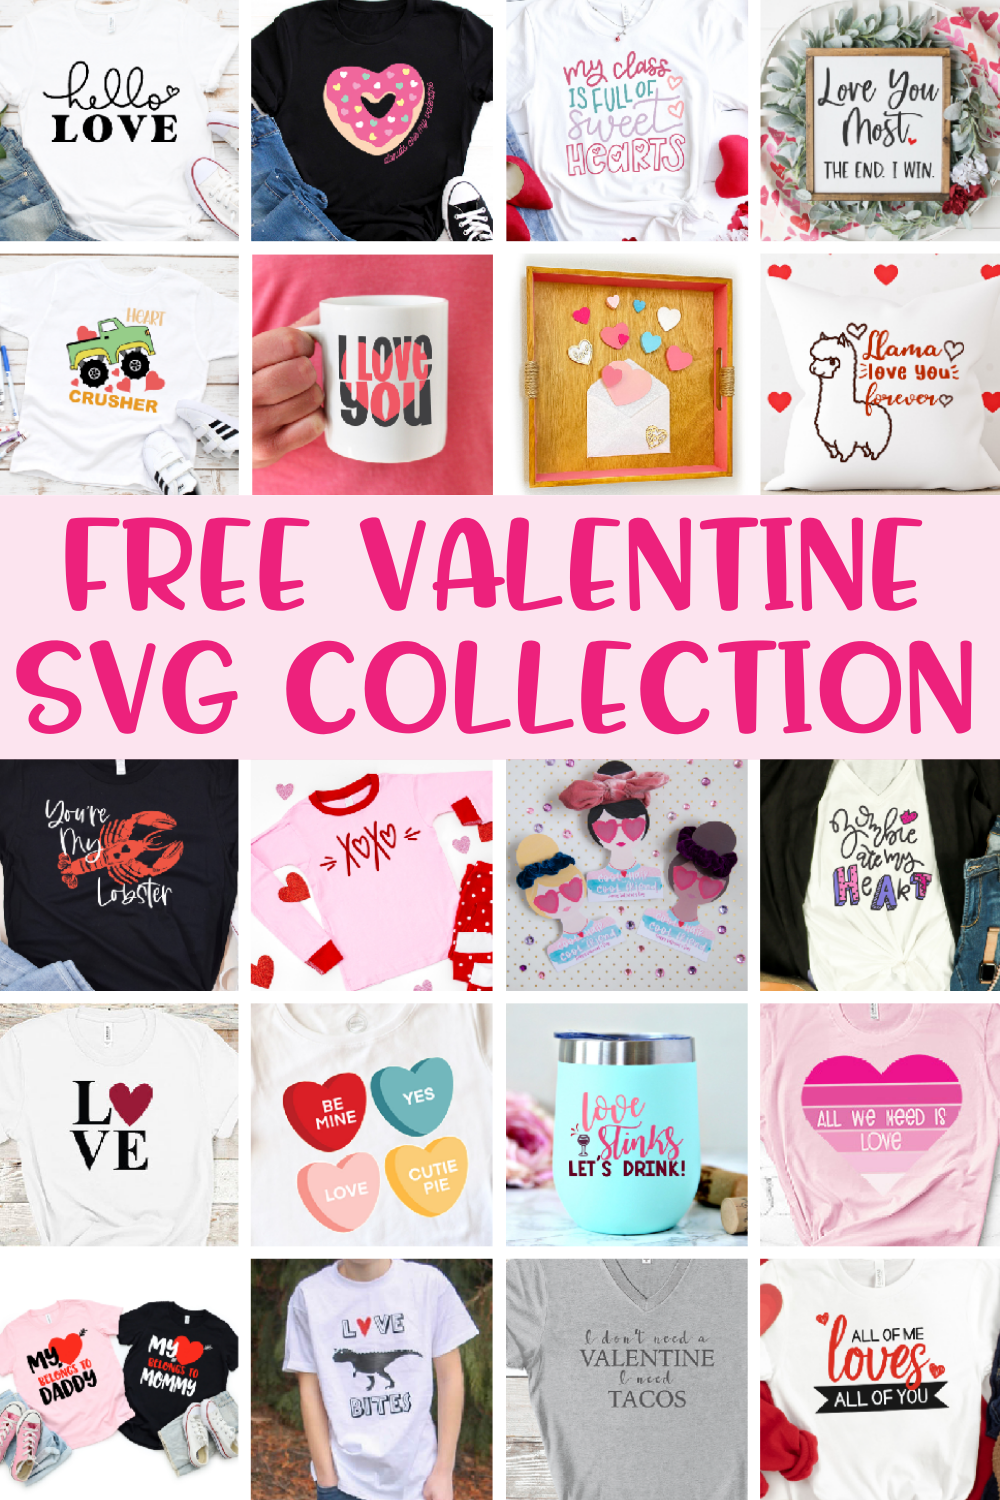 https://www.happygoluckyblog.com/wp-content/uploads/2021/01/Free-Valentine-SVG-Collection-1.png